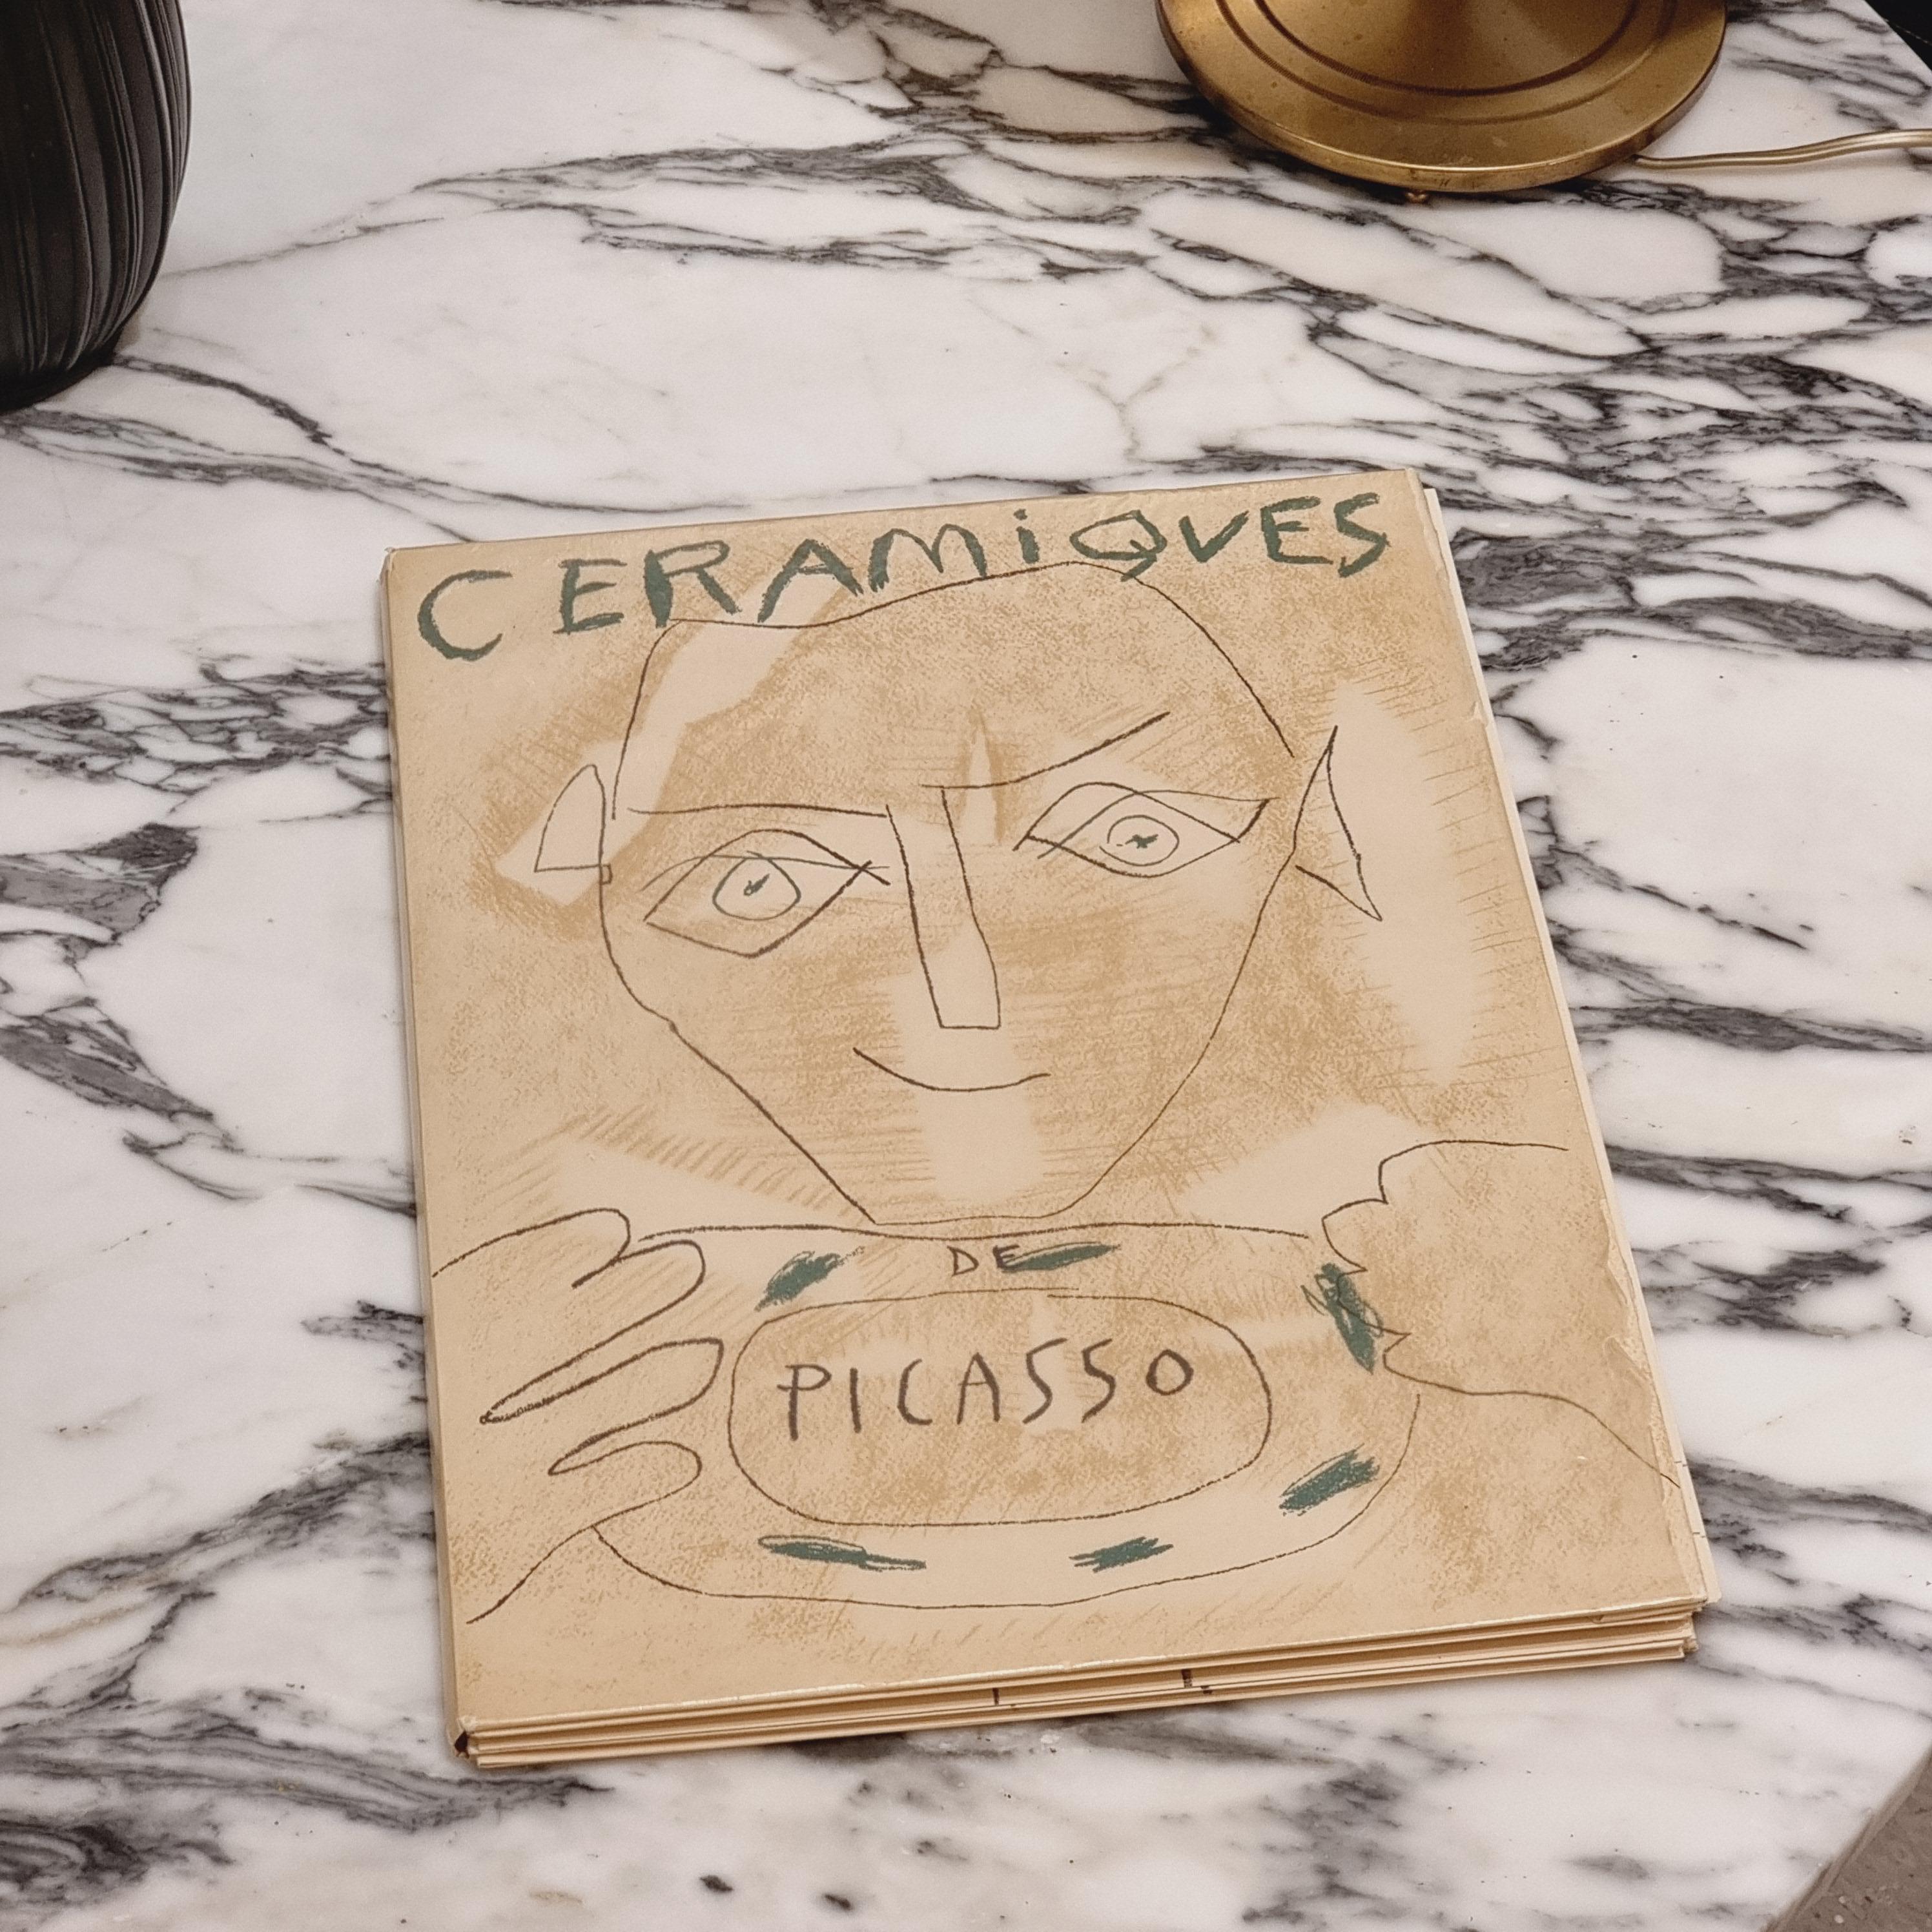 A rare folder from the Picasso ceramic exhibition held at Galerie d´Art in Stockholm 1948. The folder is printed by Albert Skira, Geneva in swedish. It contains 18 polychrome prints of Picasso Vallauris ceramic plate depicting faces, animals, food